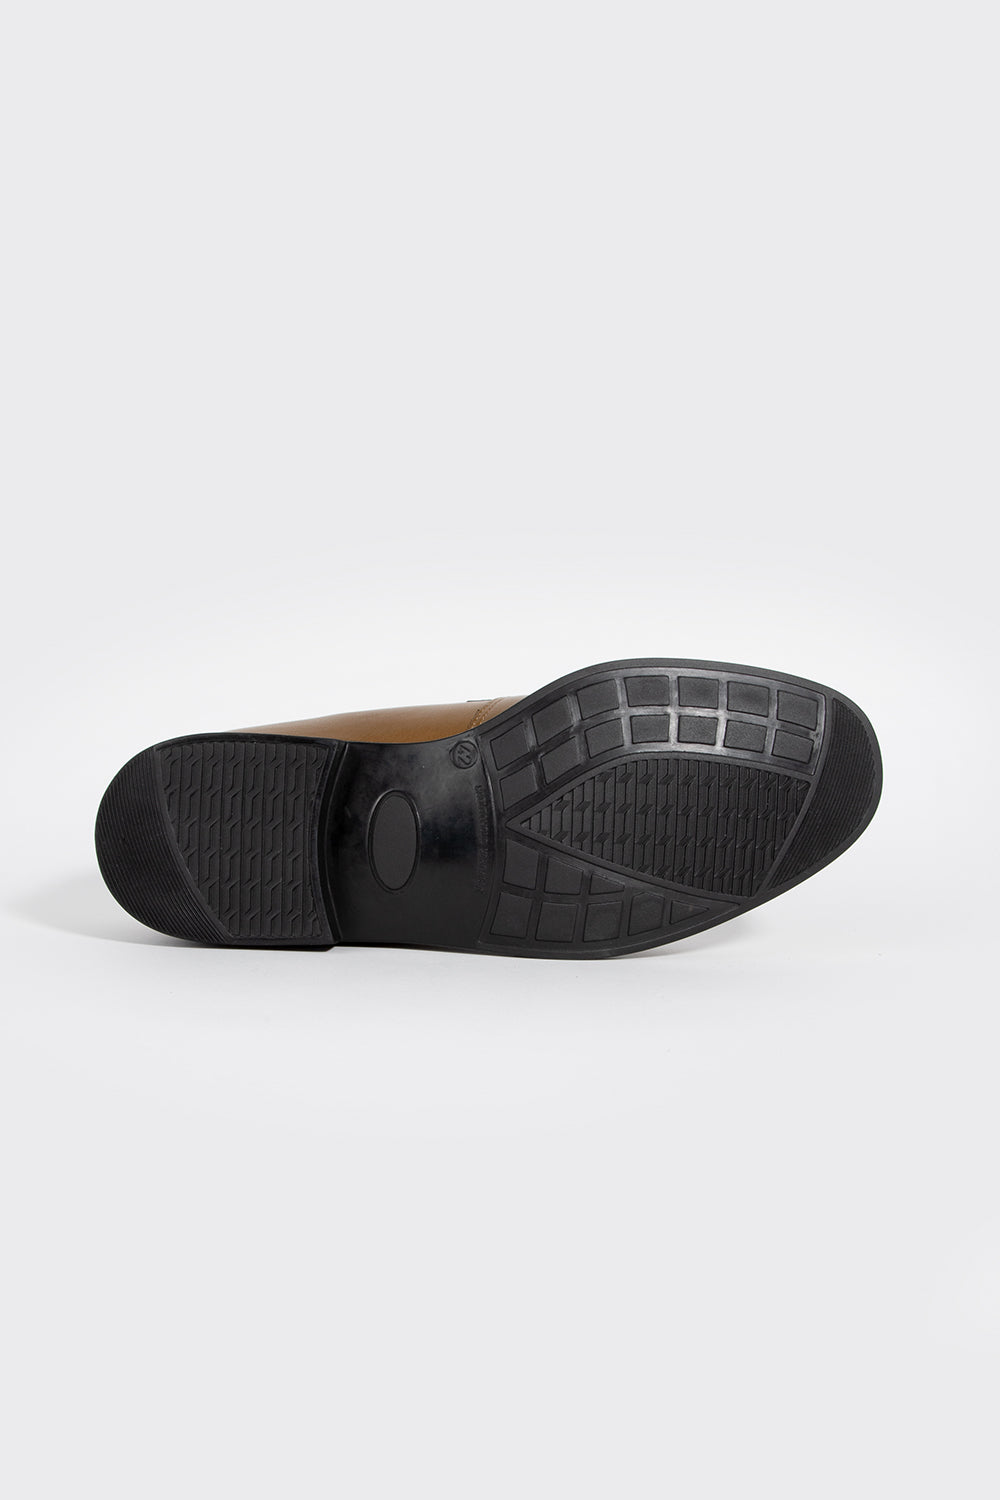 kleman dalior loafers black mens sizing womens sizing